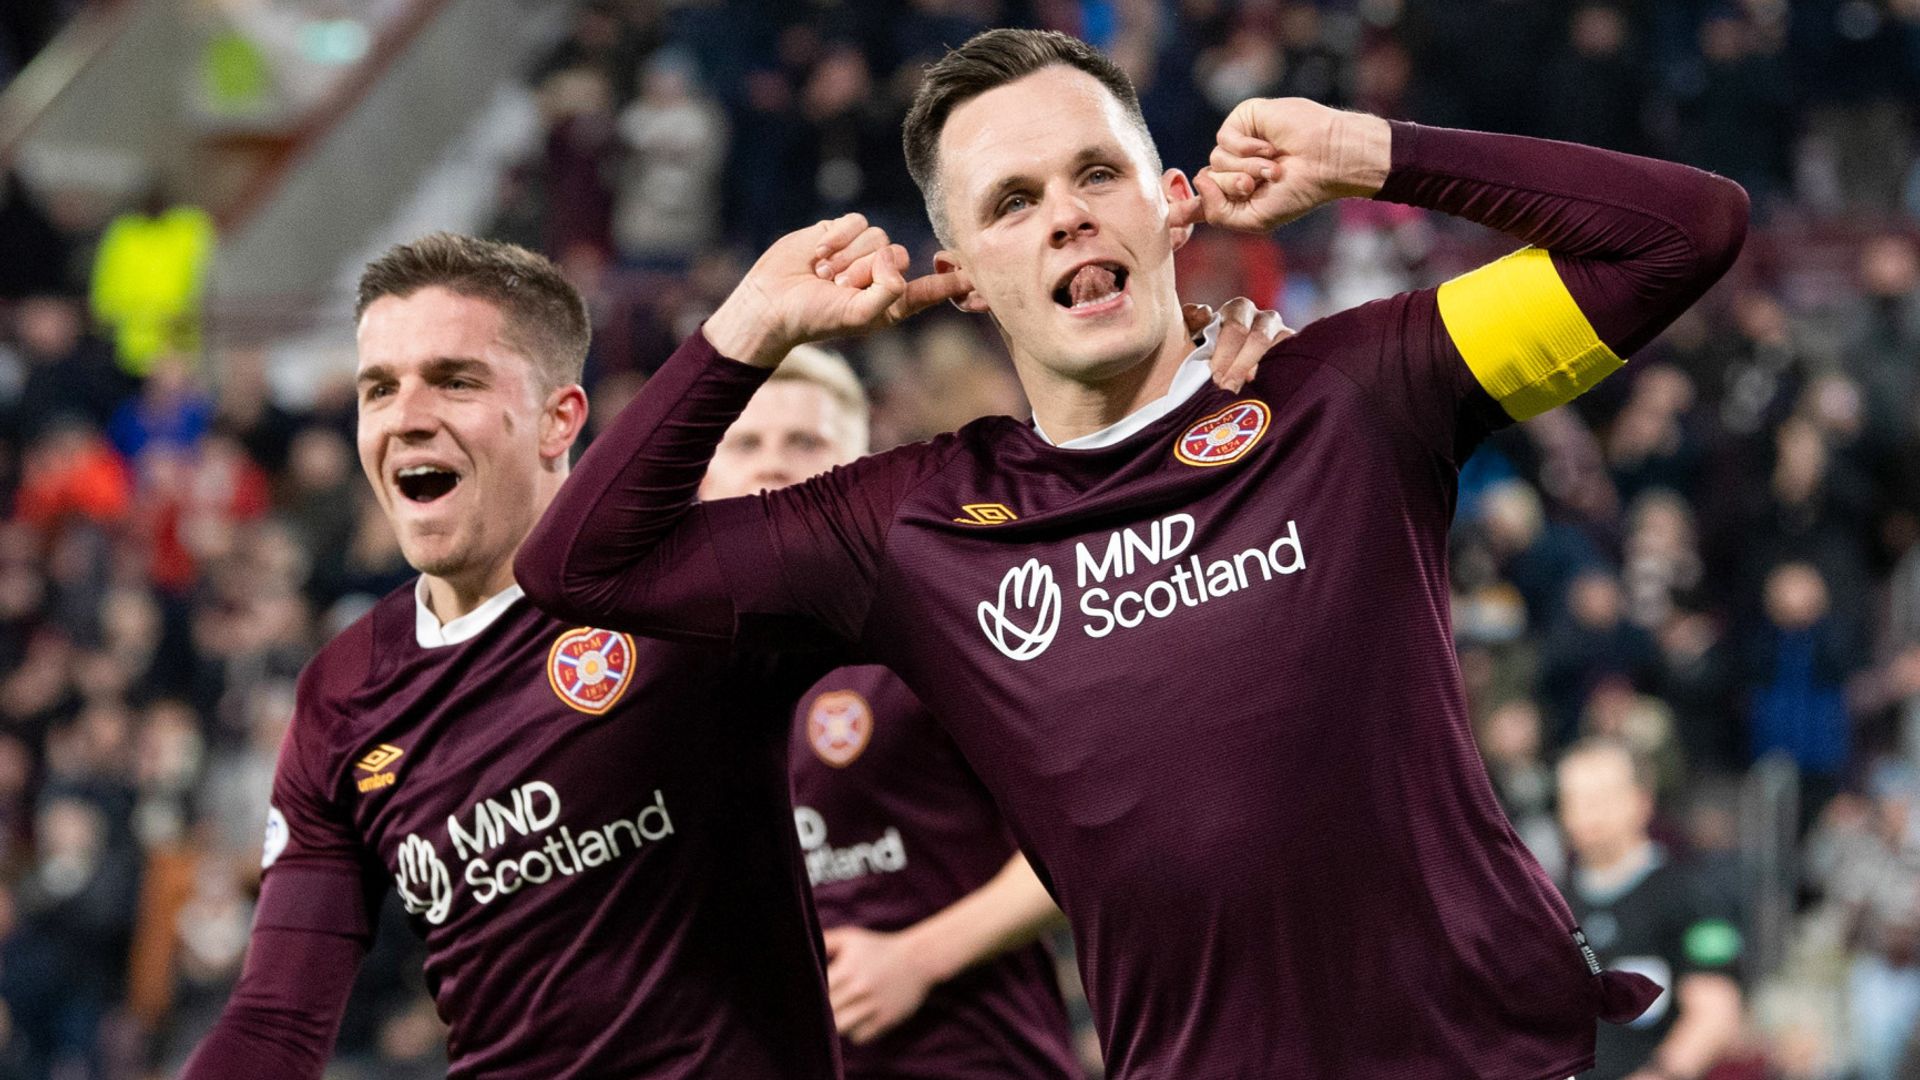 Hearts continue fine form with five-goal win over Aberdeen